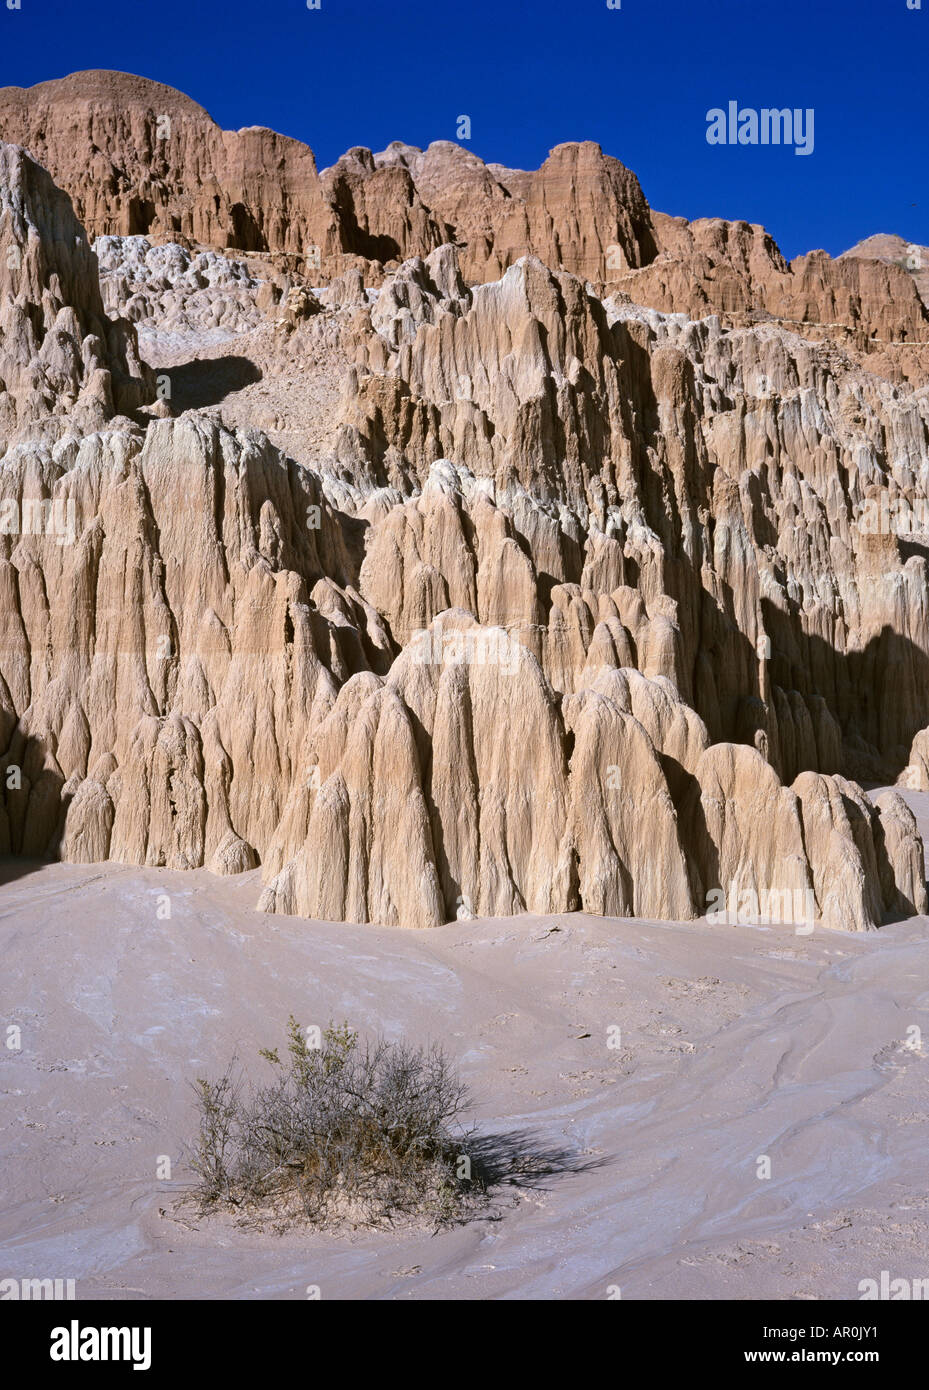 Formations eroded out of clay, near Panaca on the road 93, Nevada, USA Stock Photo